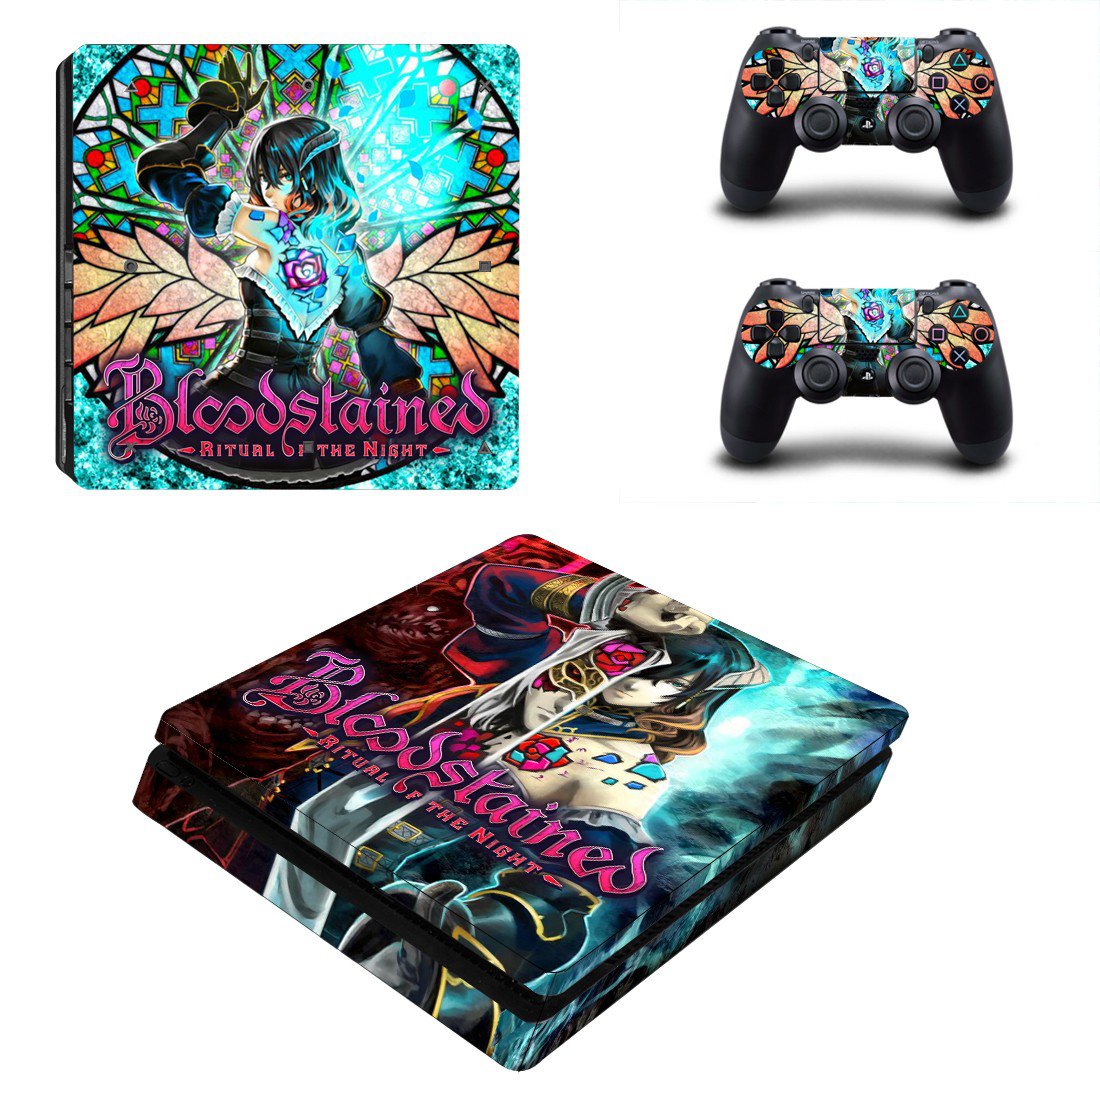 PS4 Slim And Controllers Skin Cover Bloodstained Ritual of the Night Design 1